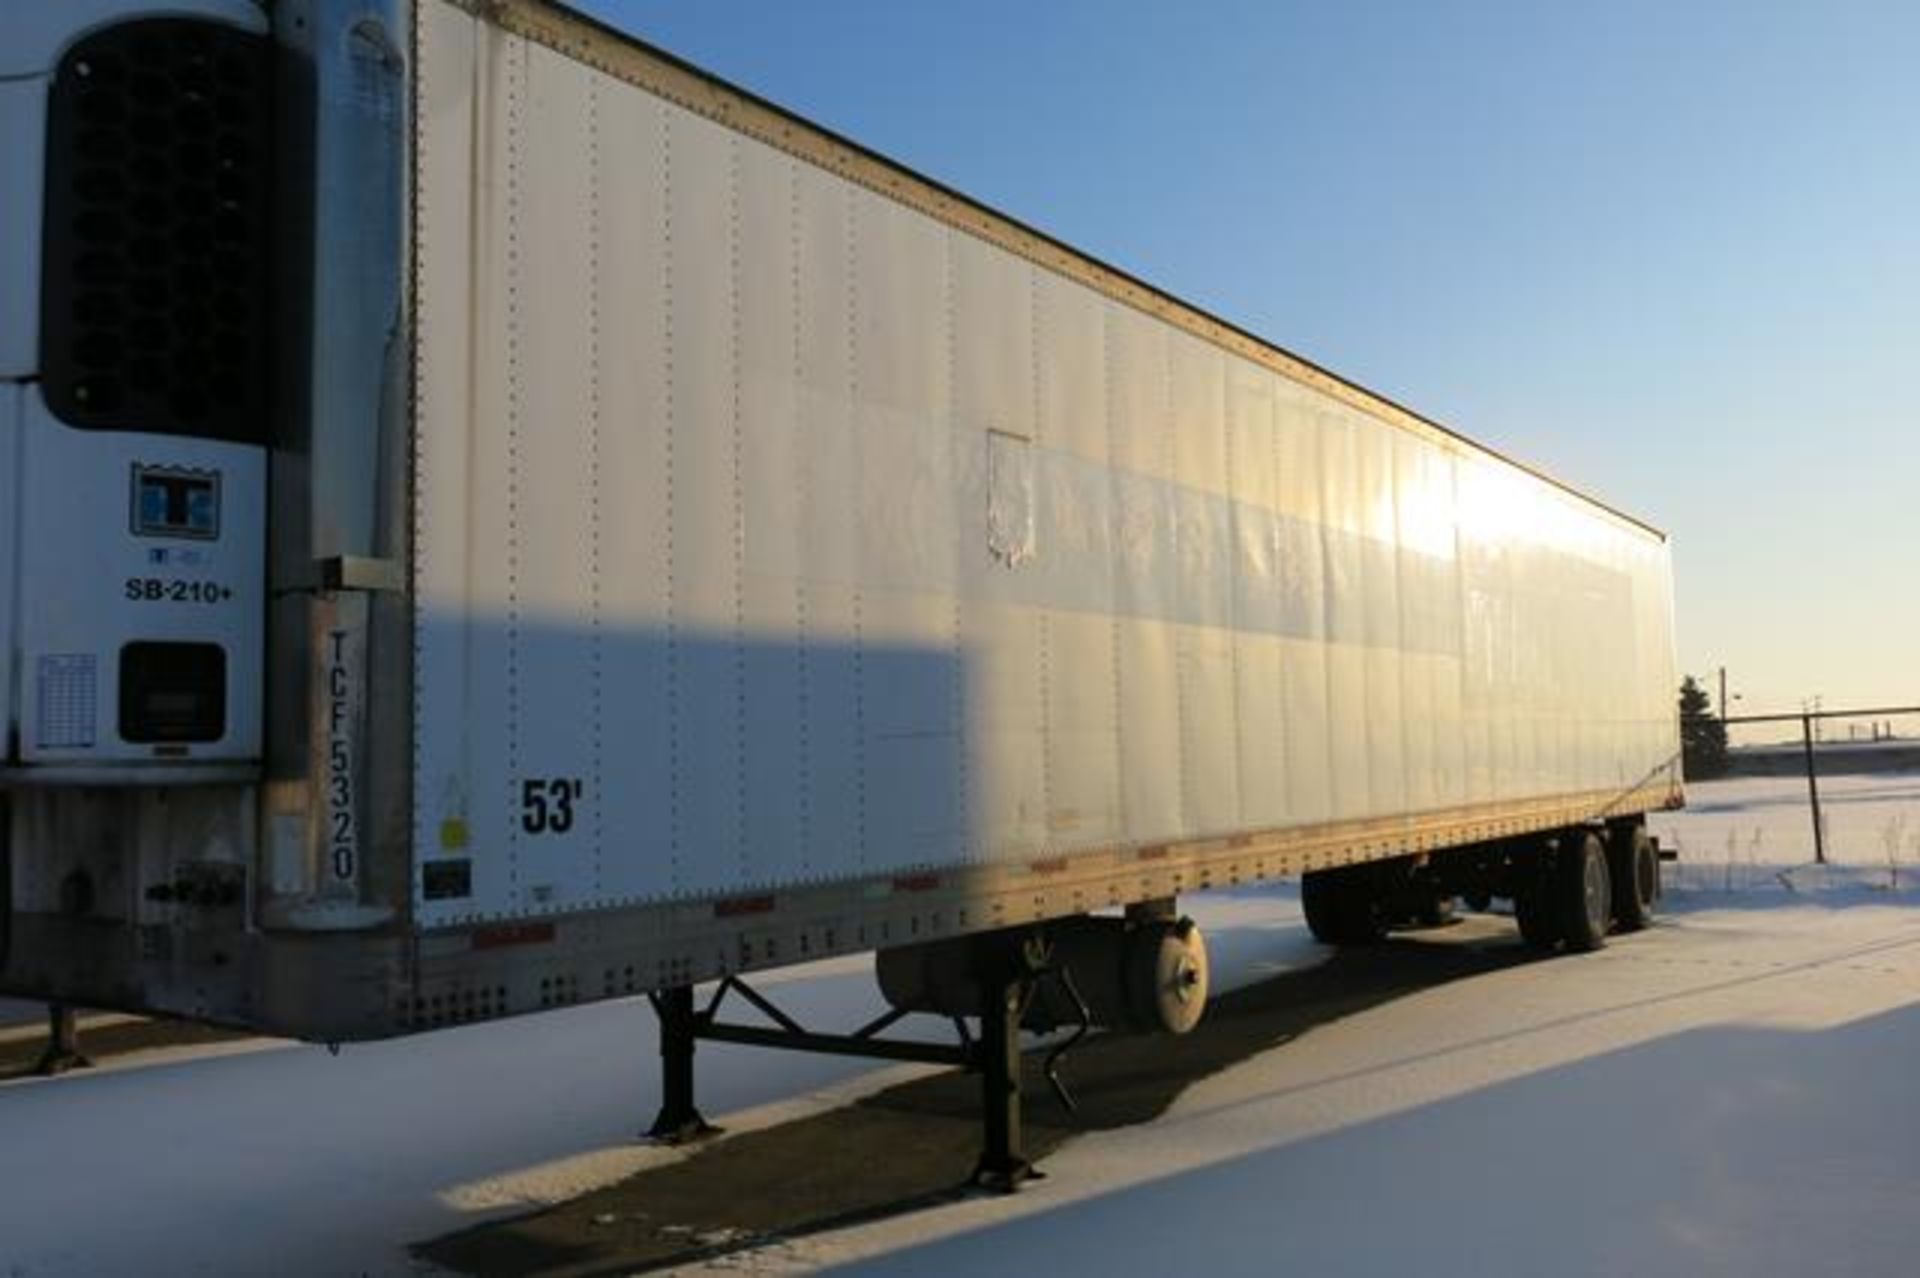 TRAILMOBILE, 53' REFRIGERATED VAN TRAILER, ROLLUP DOOR, THERMO KING, SB-210+, REEFER, 9,197 HOURS, - Image 3 of 13